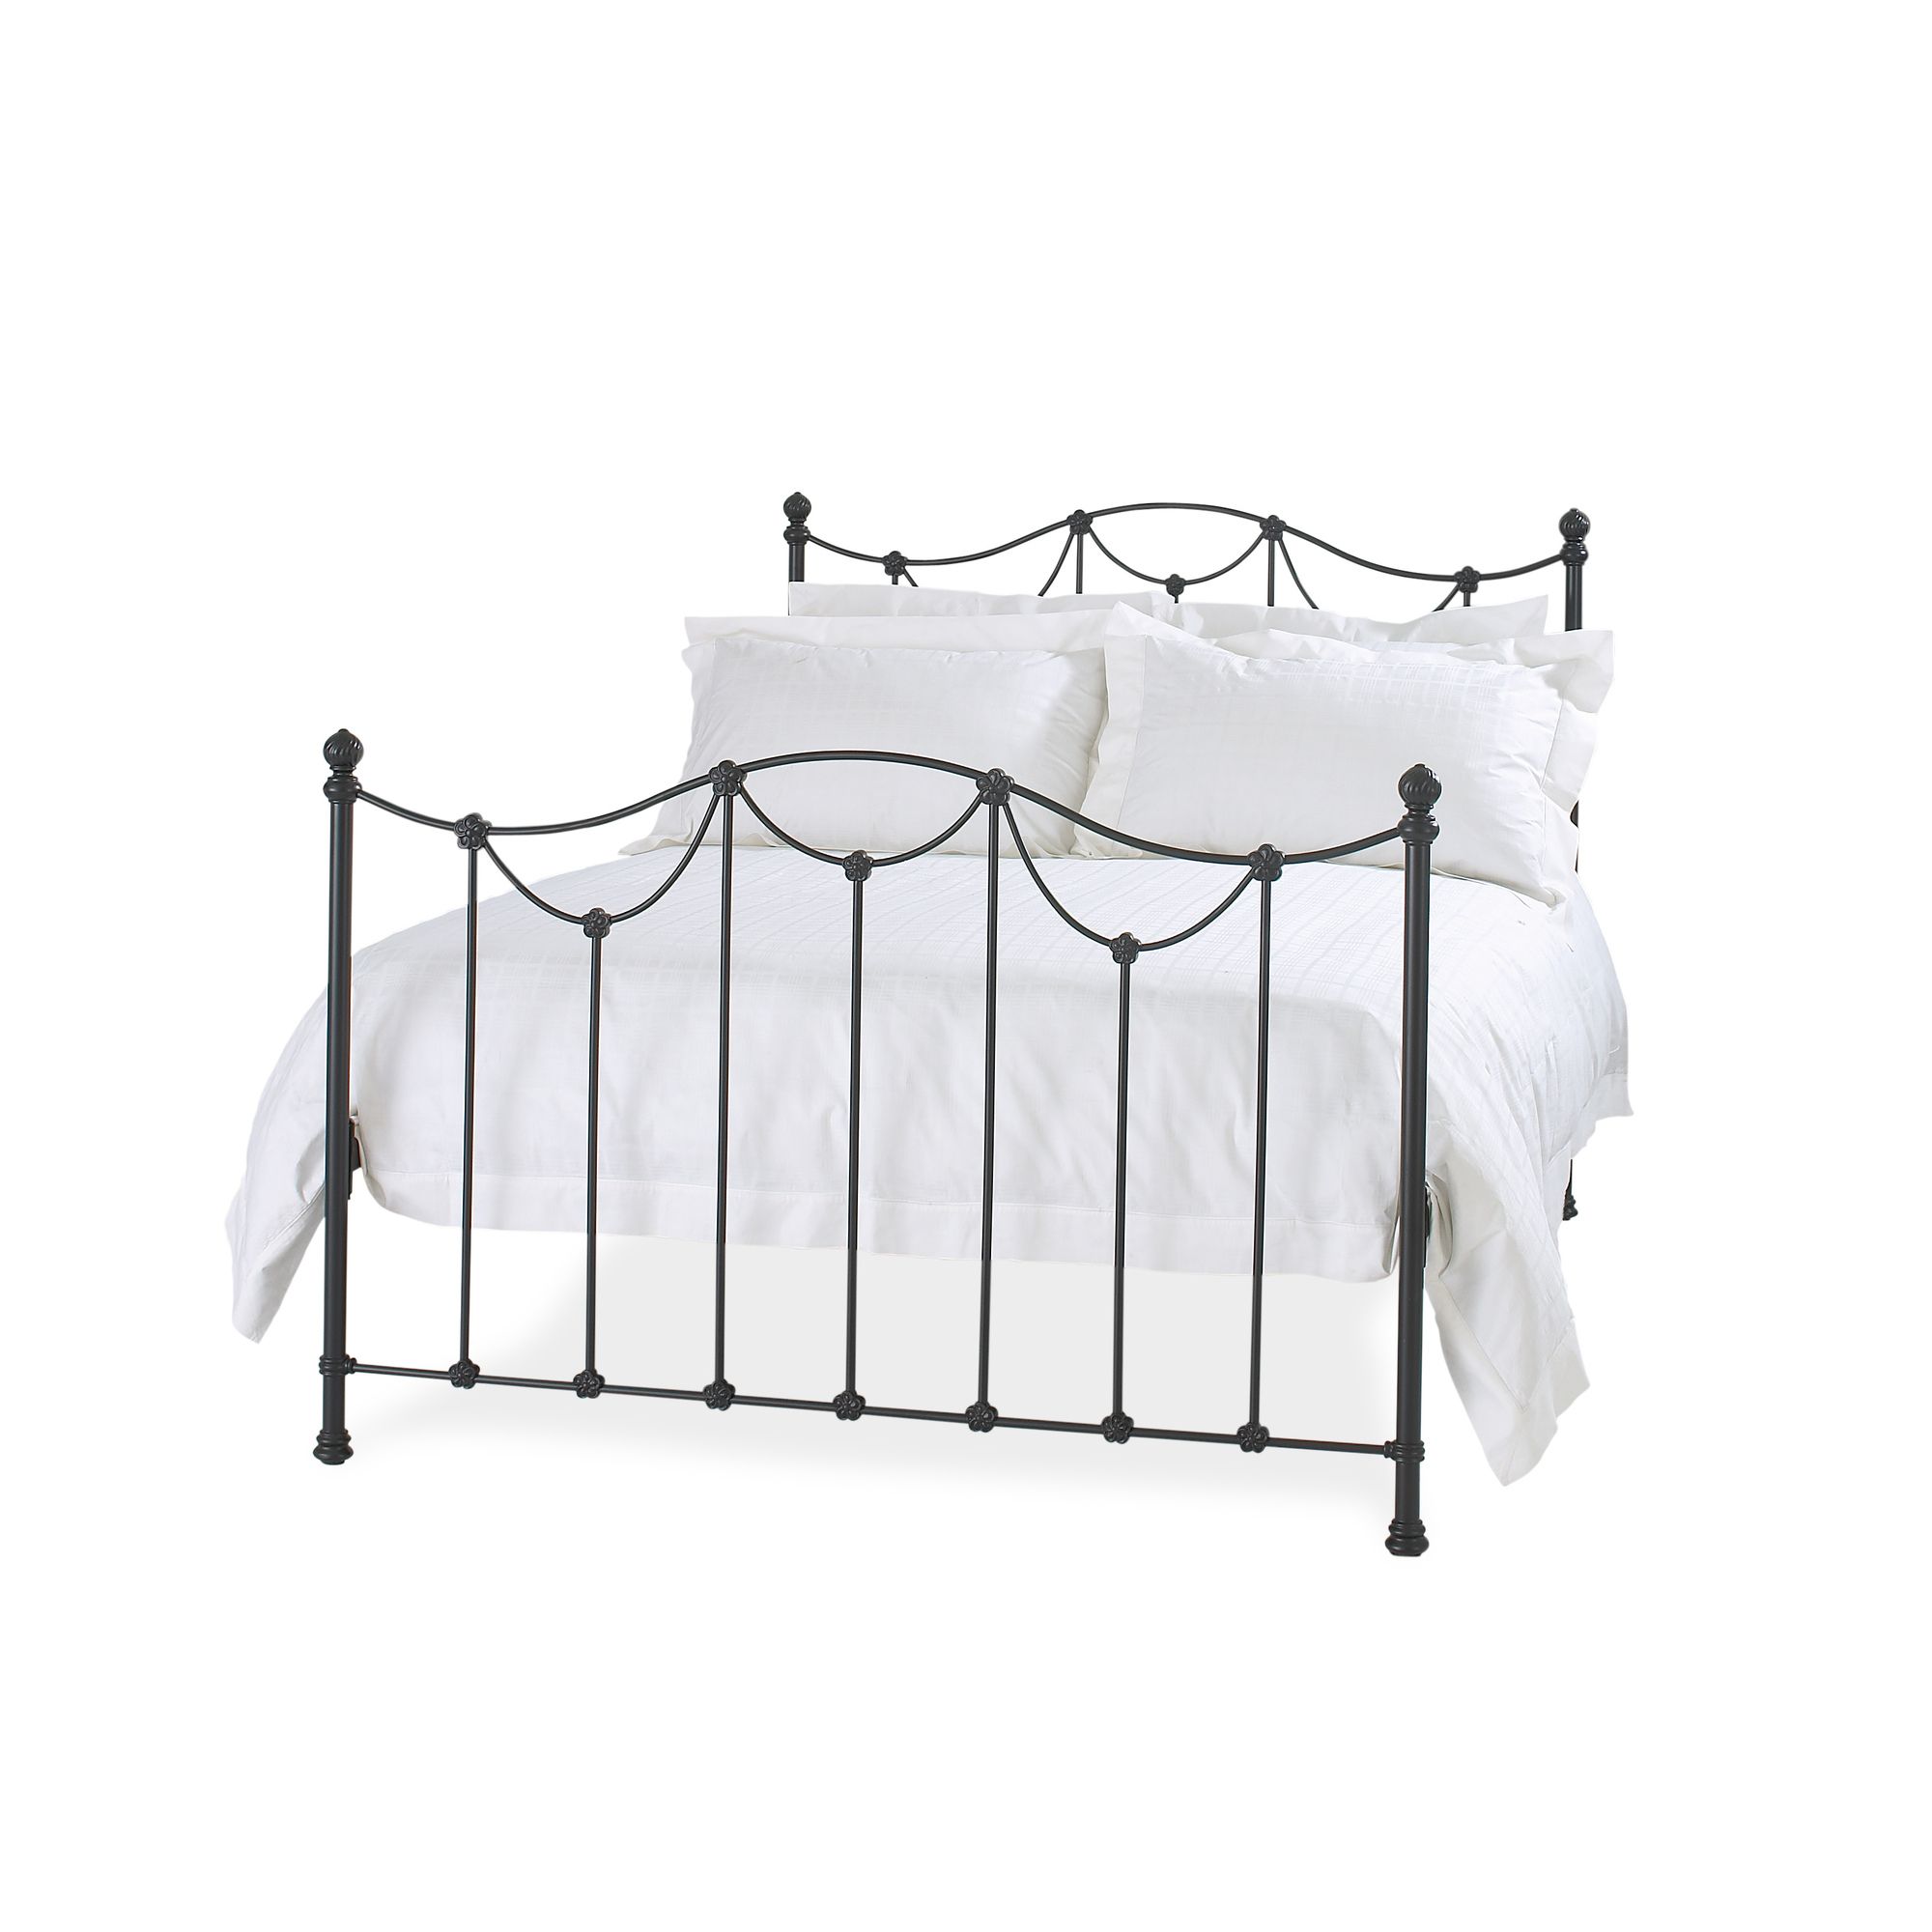 OBC Carie High Foot End Bed - Small Double - Satin Black at Tesco Direct